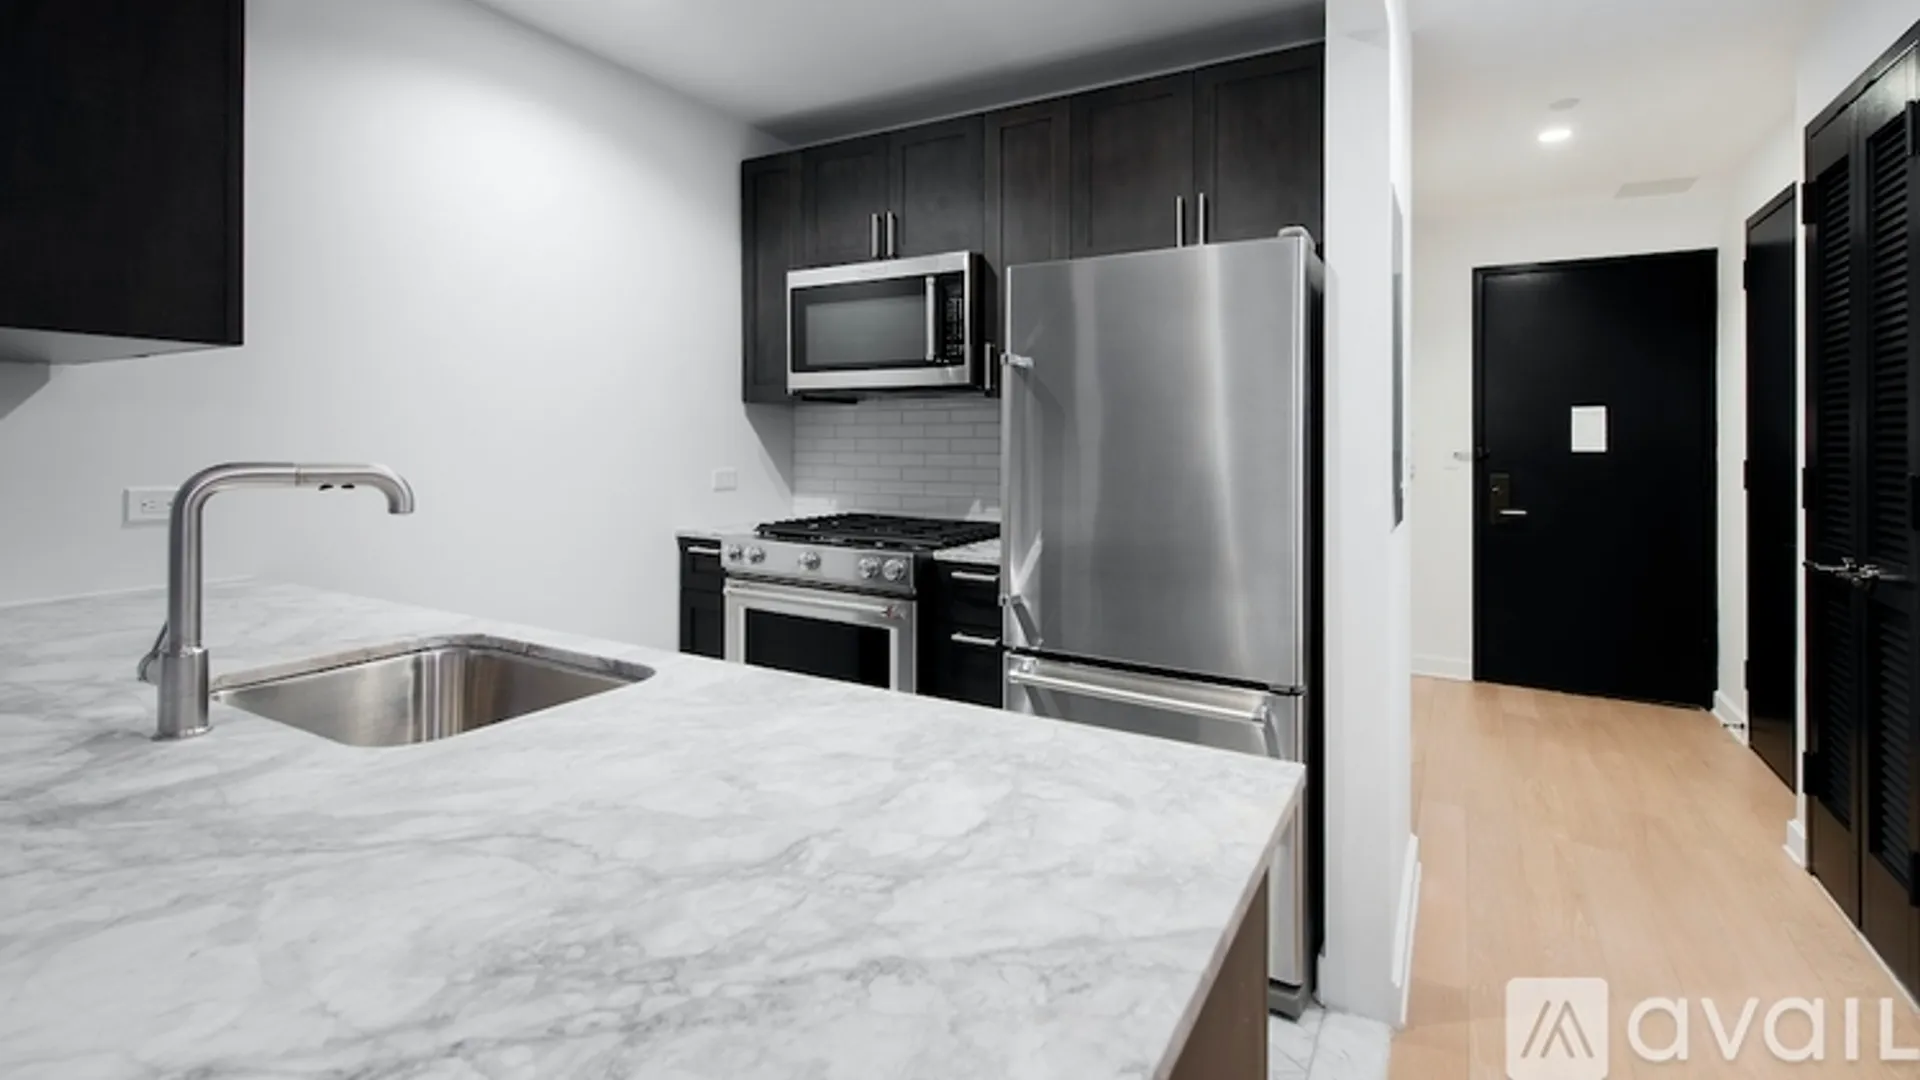 Freedom Pl S And West 61st St, Unit 2113 | Studio apartment for rent